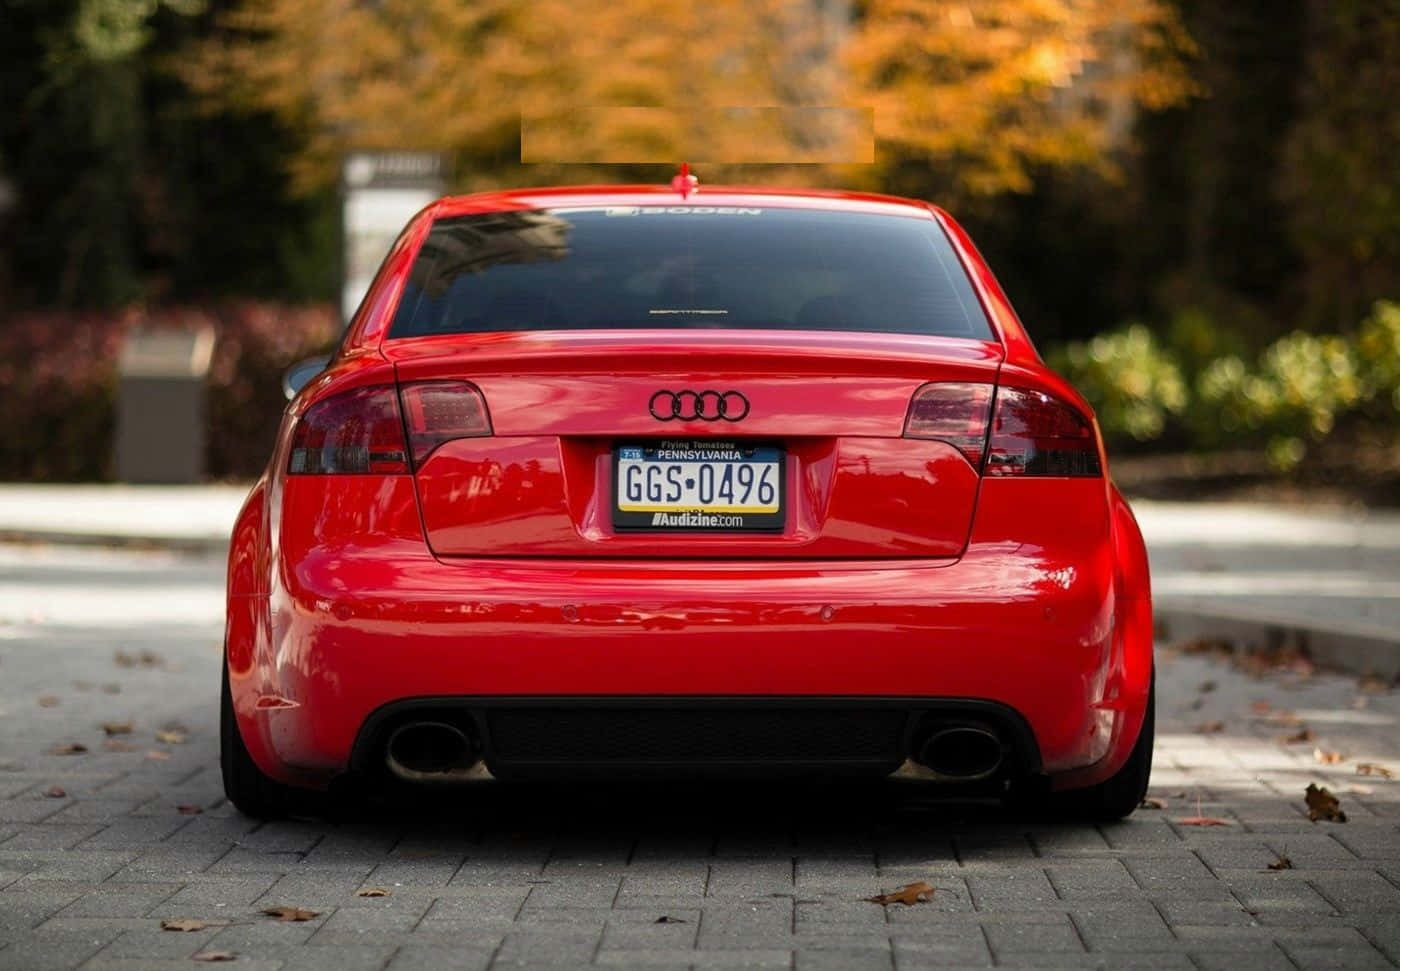 Powerful Audi RS4 Accelerating on the Road Wallpaper